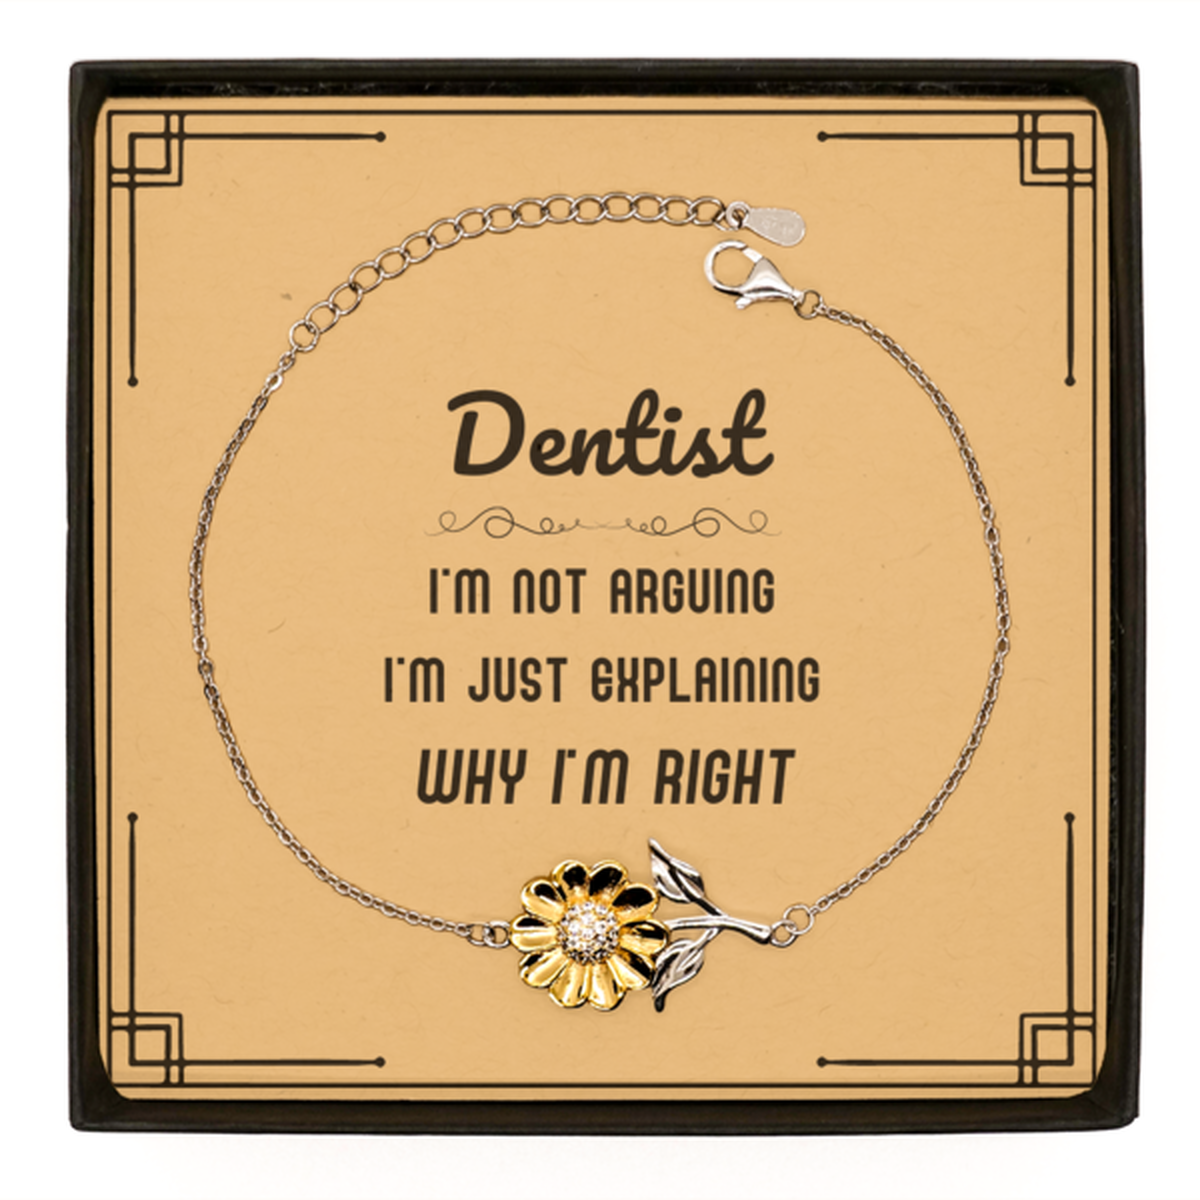 Dentist I'm not Arguing. I'm Just Explaining Why I'm RIGHT Sunflower Bracelet, Funny Saying Quote Dentist Gifts For Dentist Message Card Graduation Birthday Christmas Gifts for Men Women Coworker